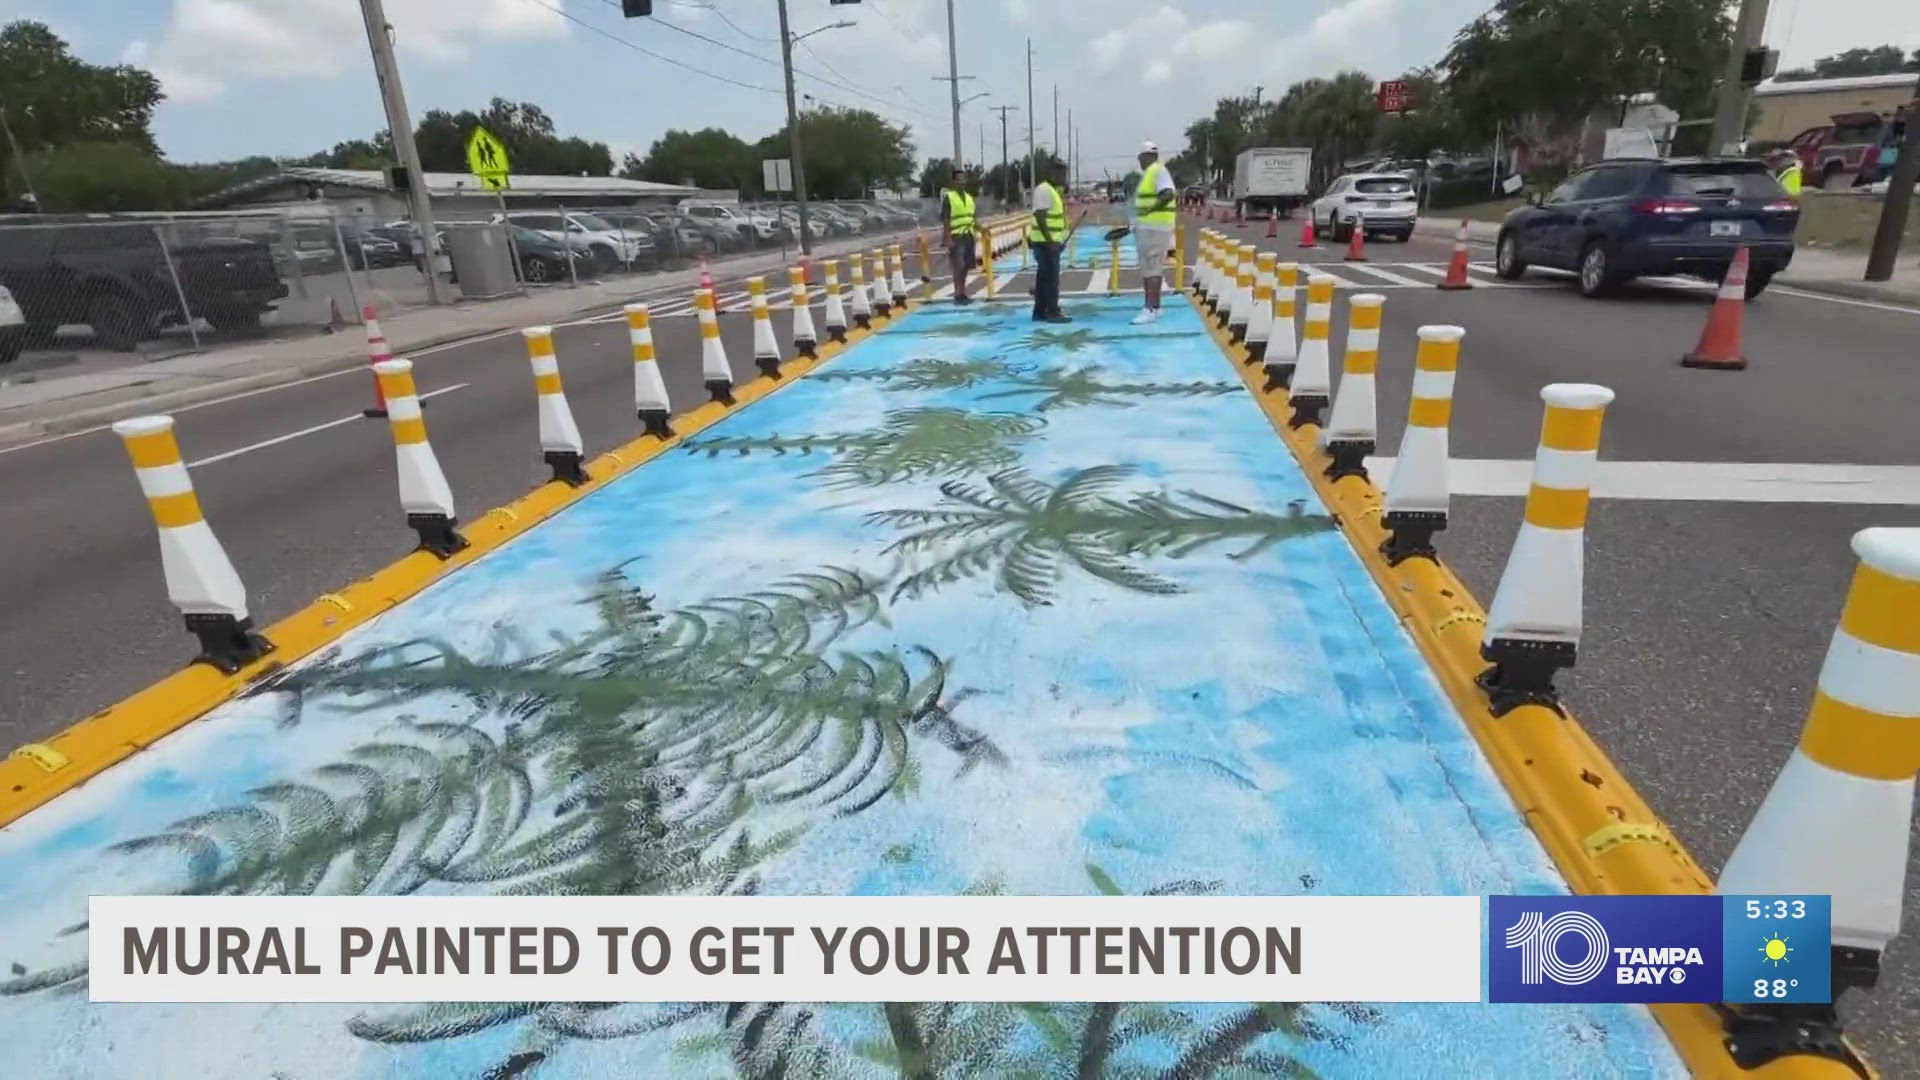 Friday, volunteers came together to paint a mural on the median on 78th Street in front of Clair Mel Elementary School in Tampa.